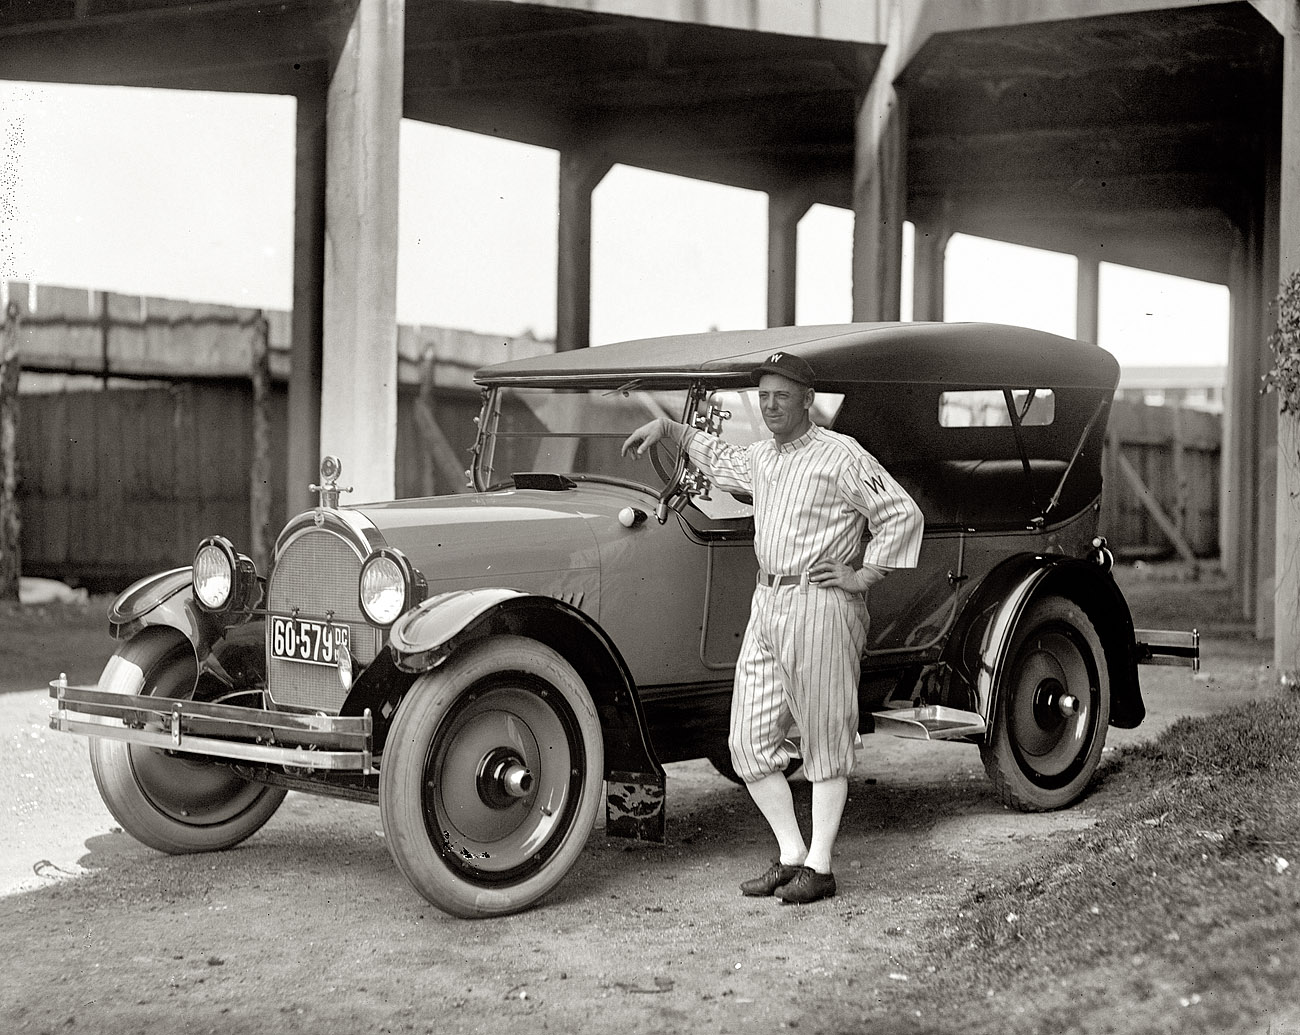 1922. "Milan and Oldsmobile." Washington Nationals manager Clyde Milan. National Photo Company Collection glass negative. View full size.